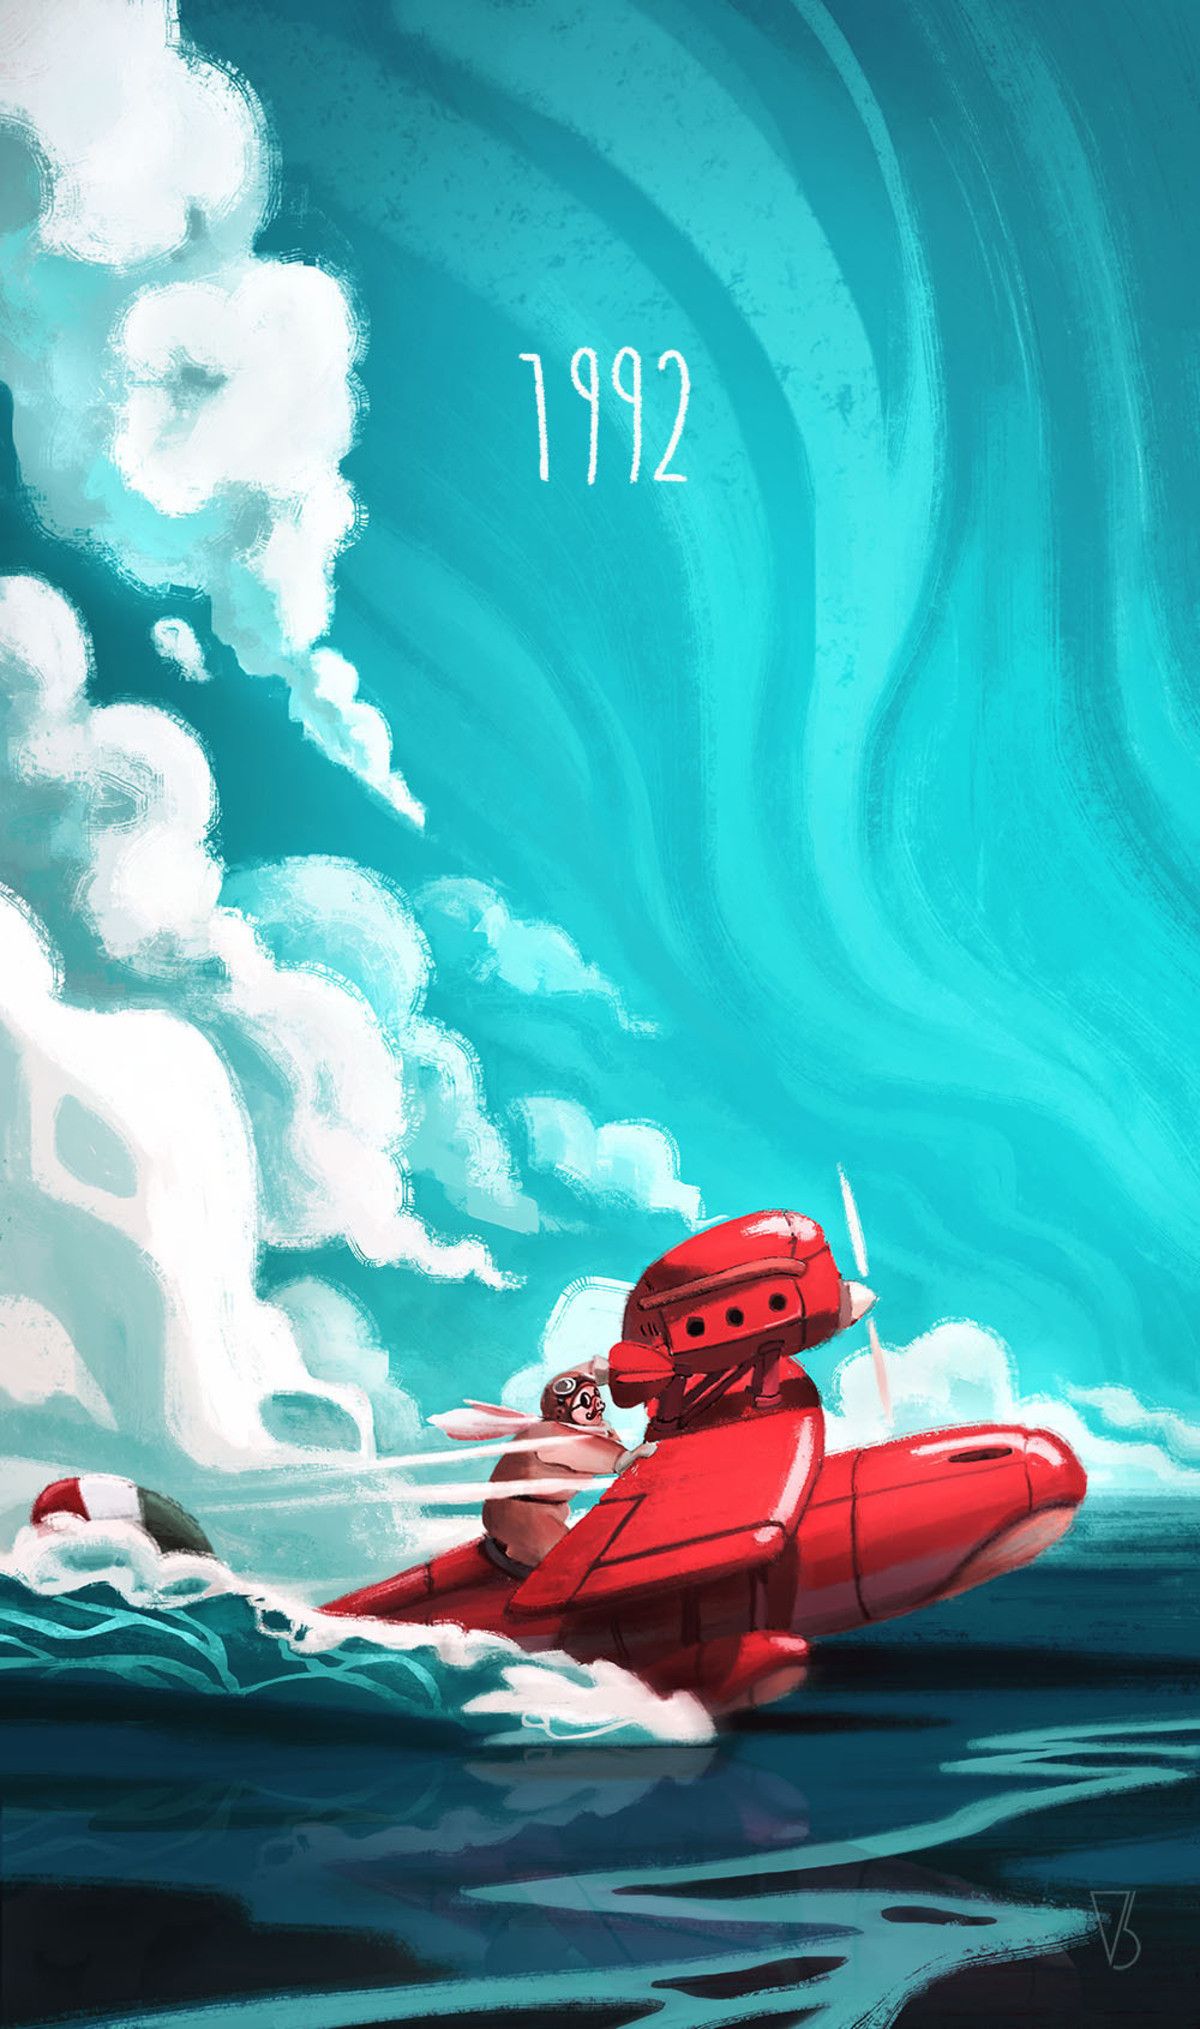 Porco Rosso Iphone Wallpapers